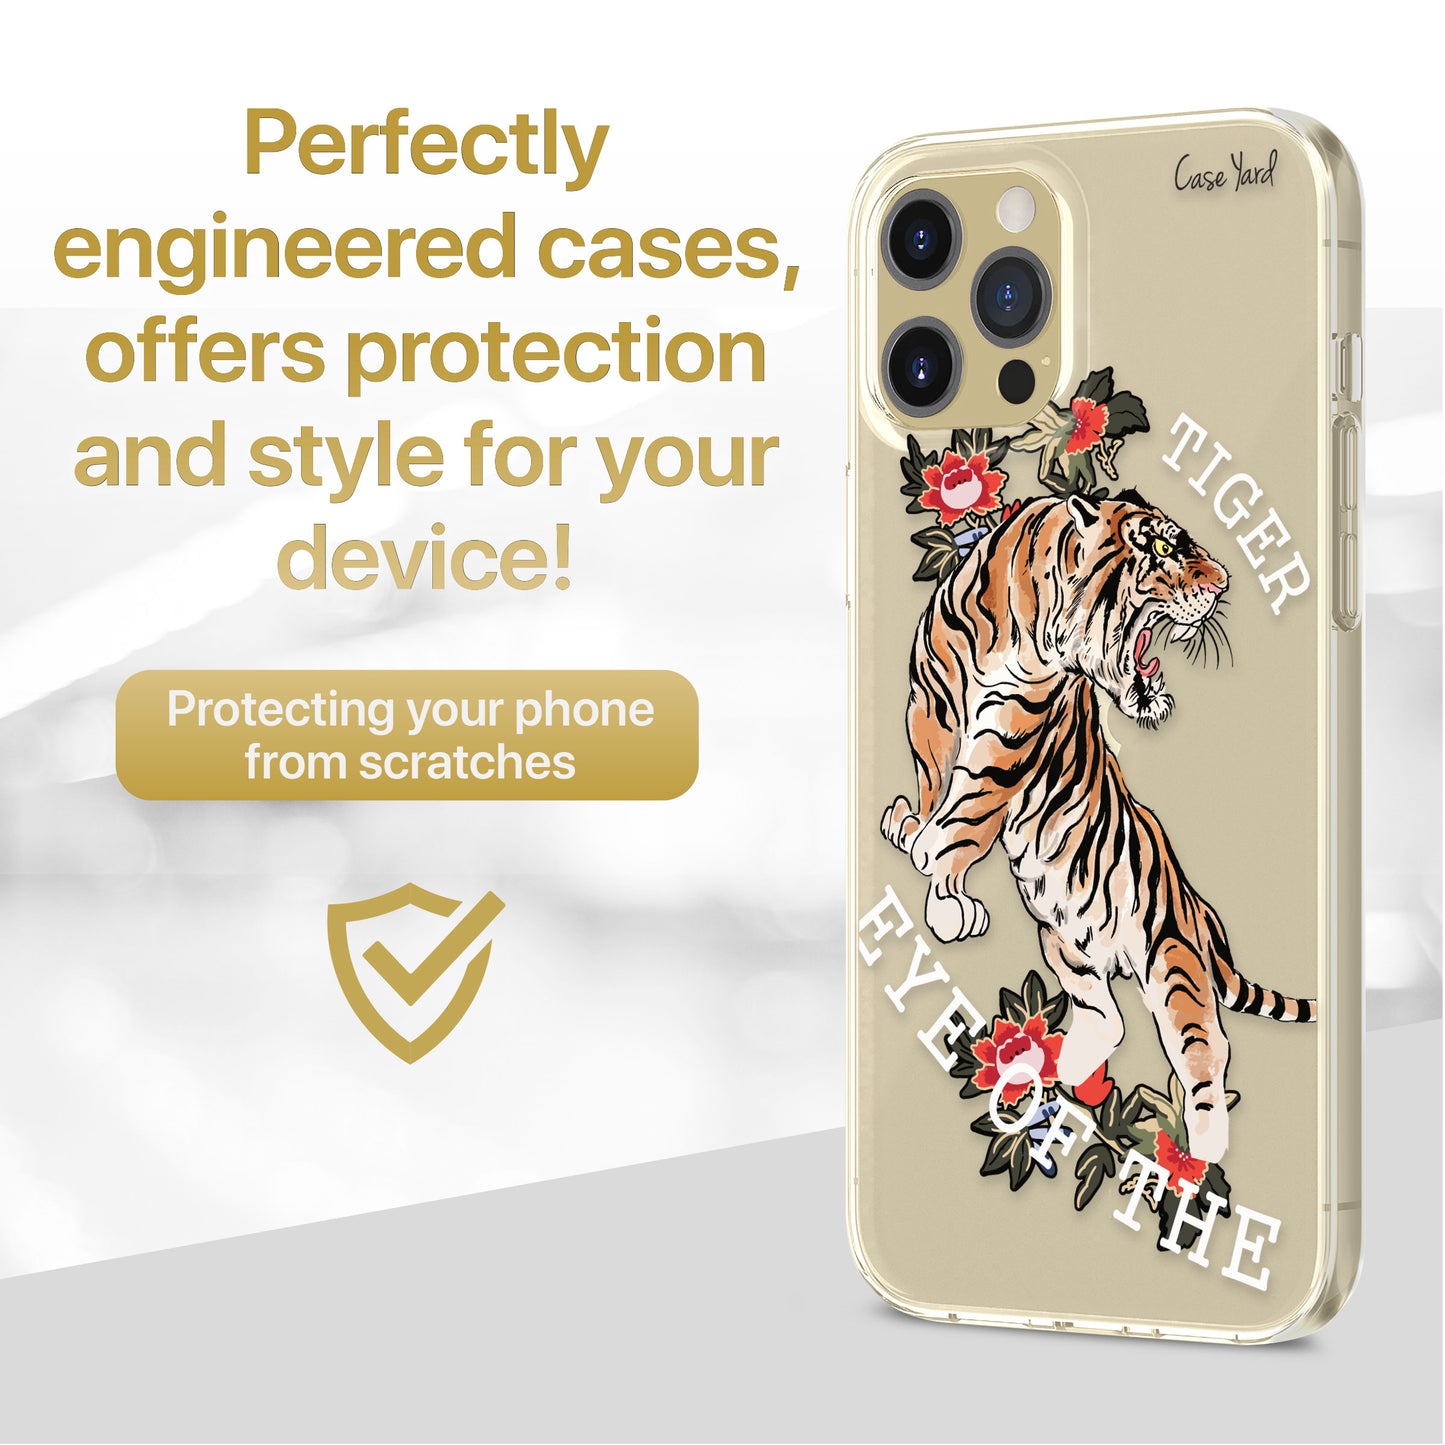 TPU Case Clear case with (Eye of the Tiger) Design for iPhone & Samsung Phones